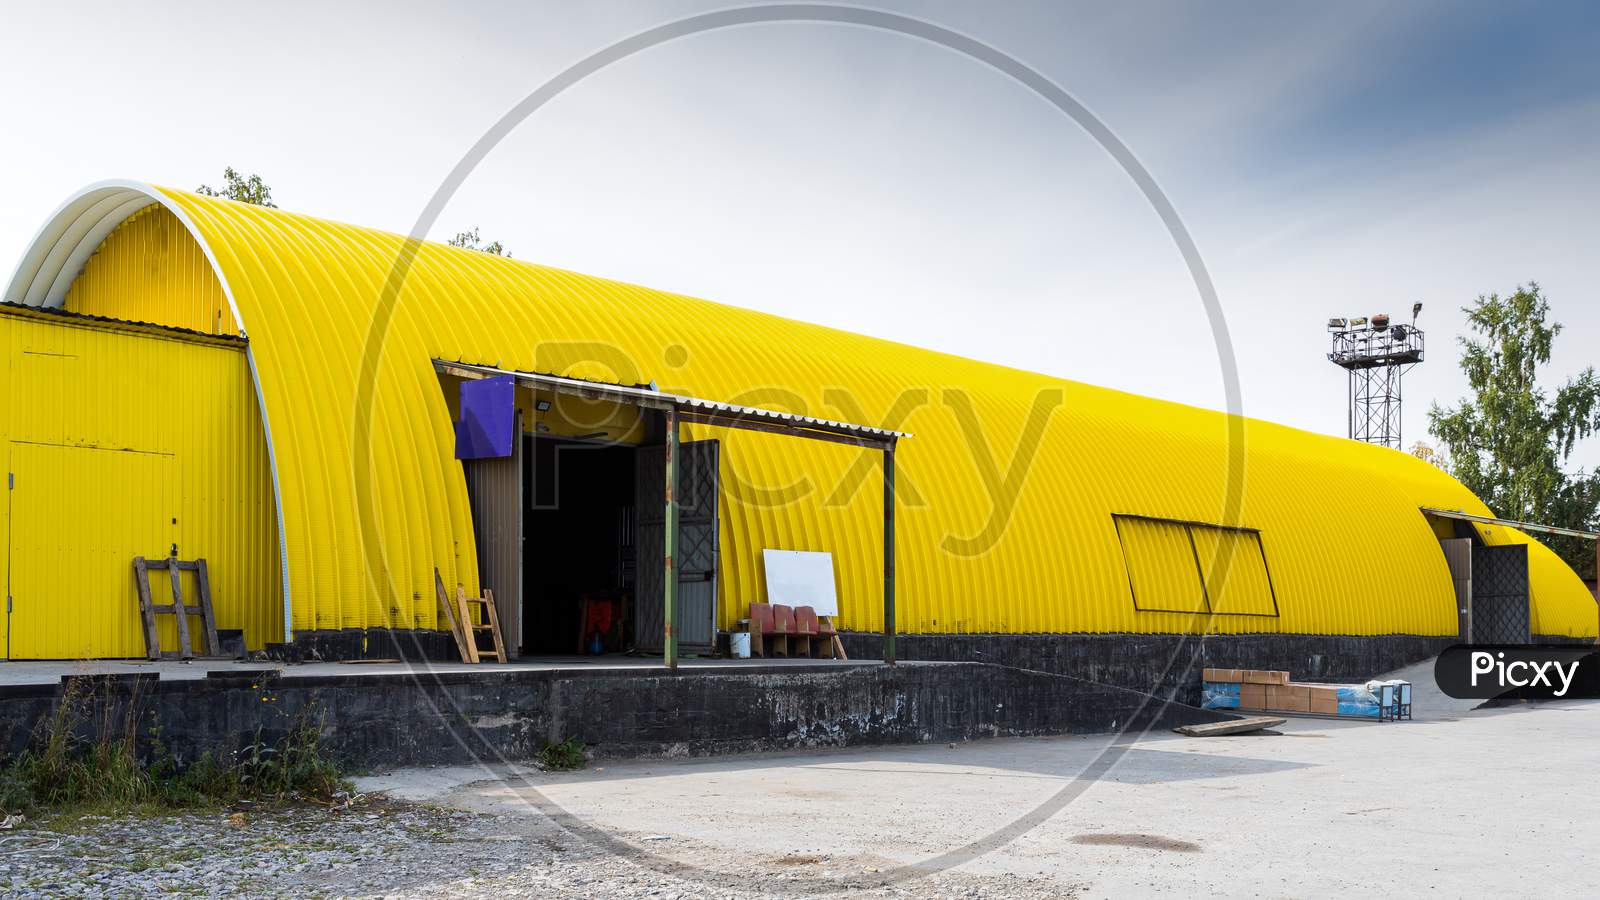 Facade Of A Yellow Metal Warehouse, Commercial Building For Storage Of Goods. The Concept Of Storage Of Goods By Importers, Exporters, Wholesalers, Transport Enterprises, Customs